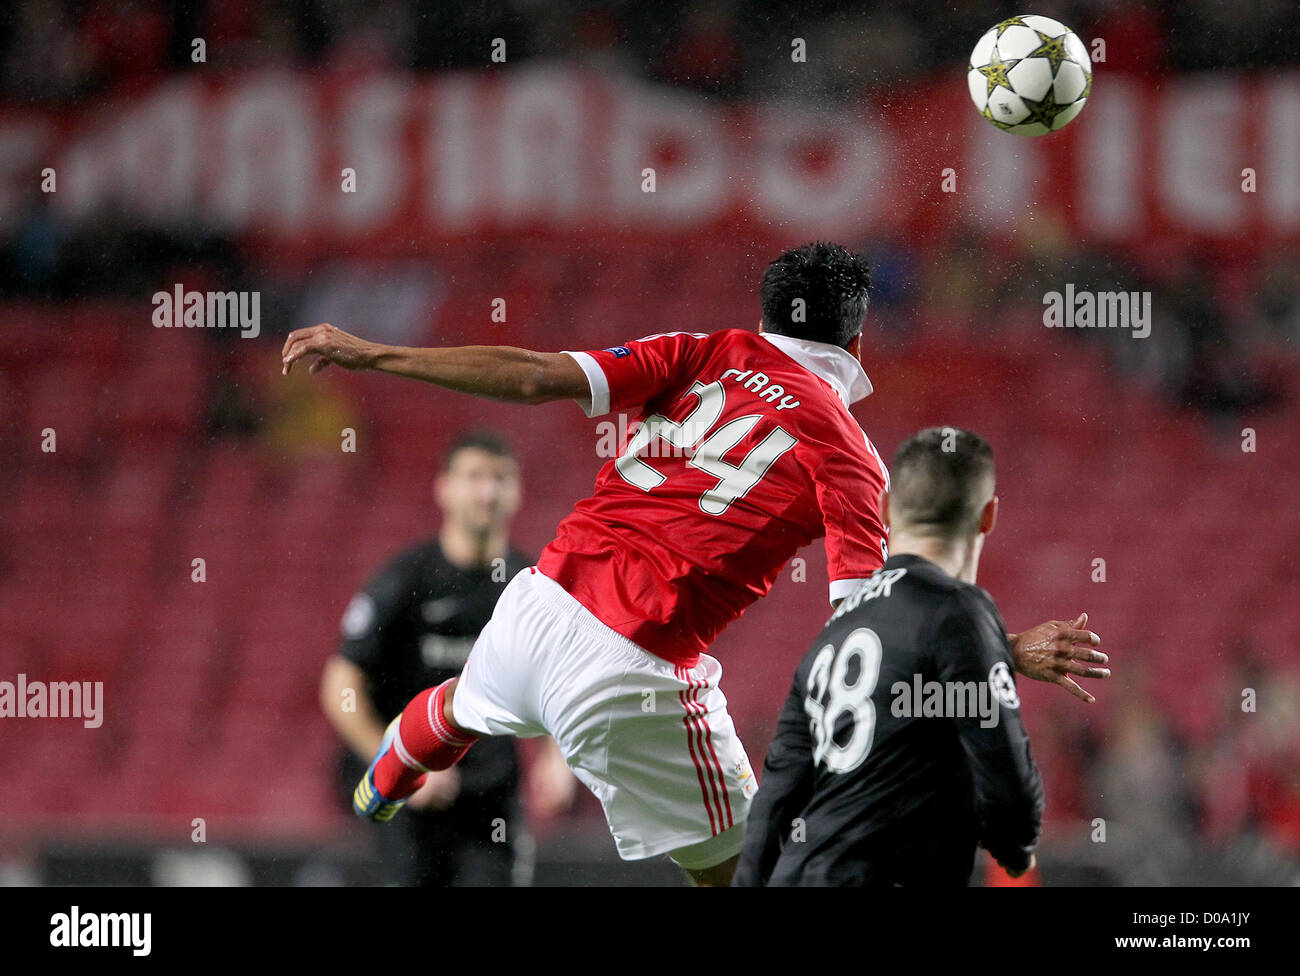 Lisbon, Portugal. 20th November 2012. Benfica's defense Ezequiel Garay wins the the ball during the group G UEFA Champions League  football match between Benfica and Celtic at Luz Stadium in Lisbon on November 20, 2012.   Photo / Carlos Rodrigues (Photo credit should read Carlos Rodrigues ). Stock Photo